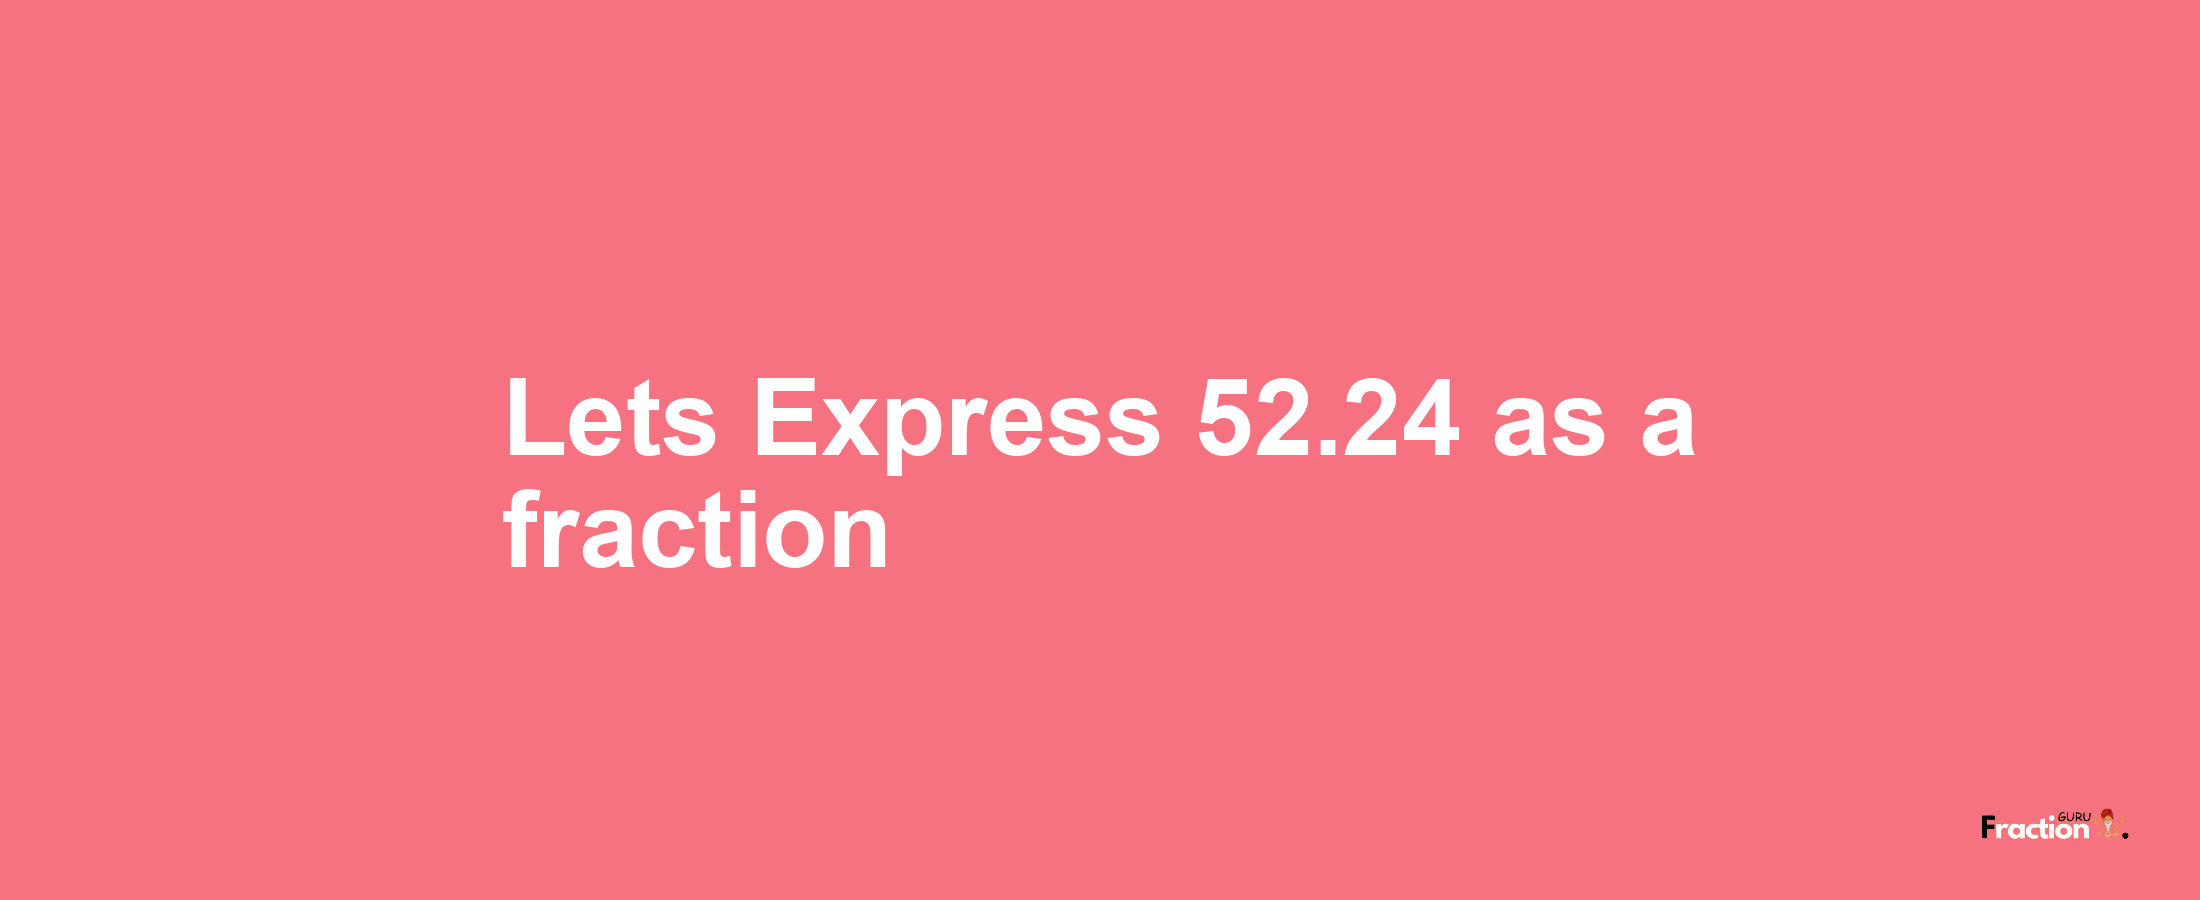 Lets Express 52.24 as afraction